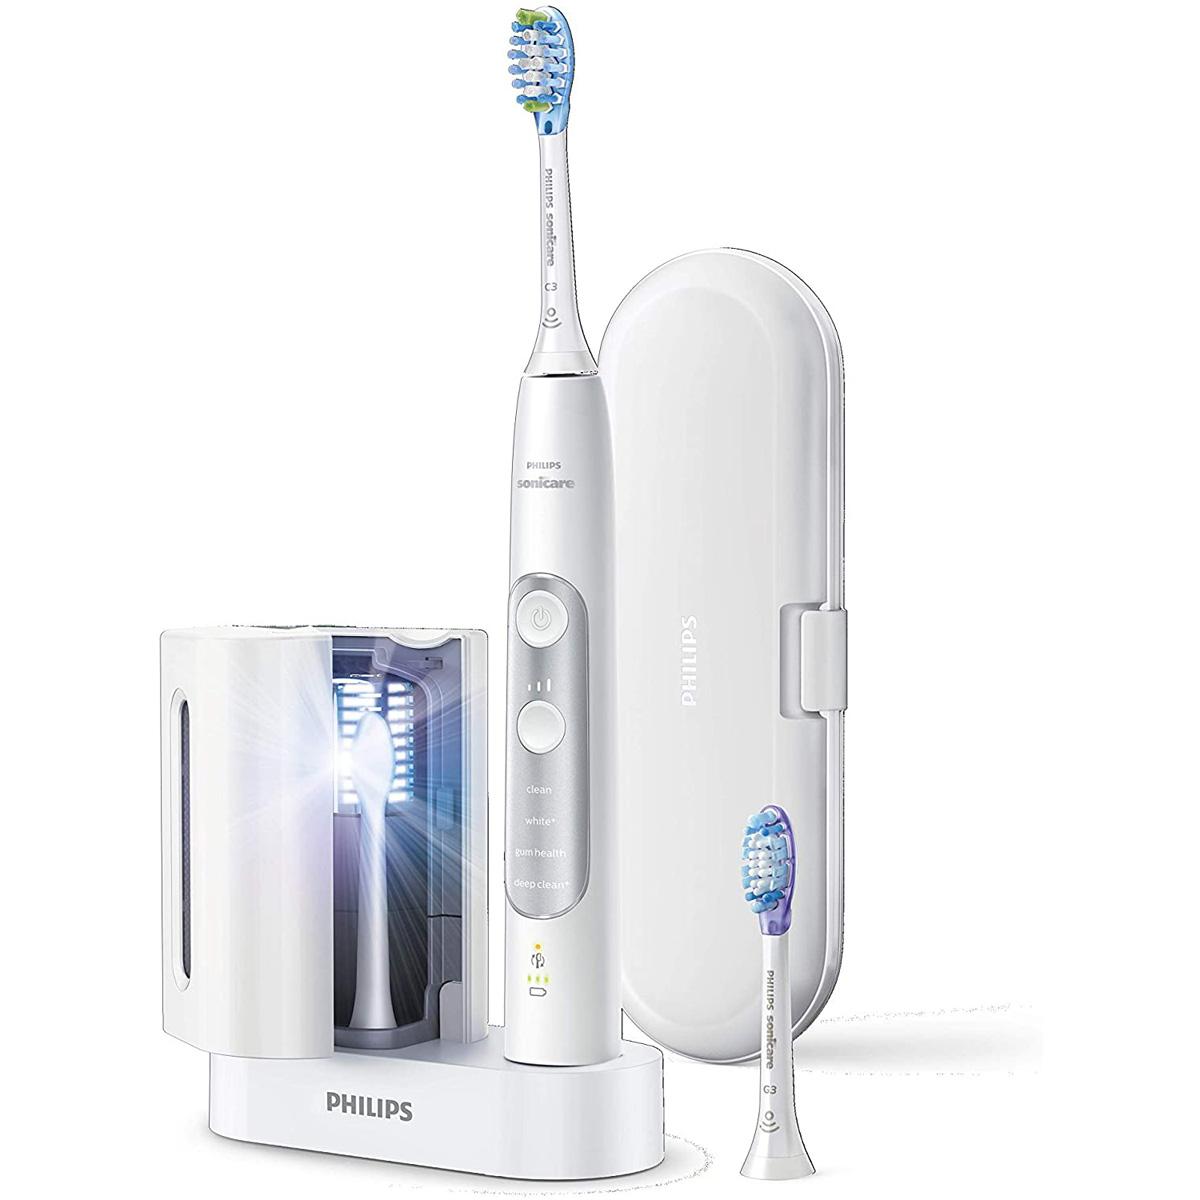 Philips Sonicare Expertclean 7700 Rechargeable Electric Toothbrush for $99.99 Shipped